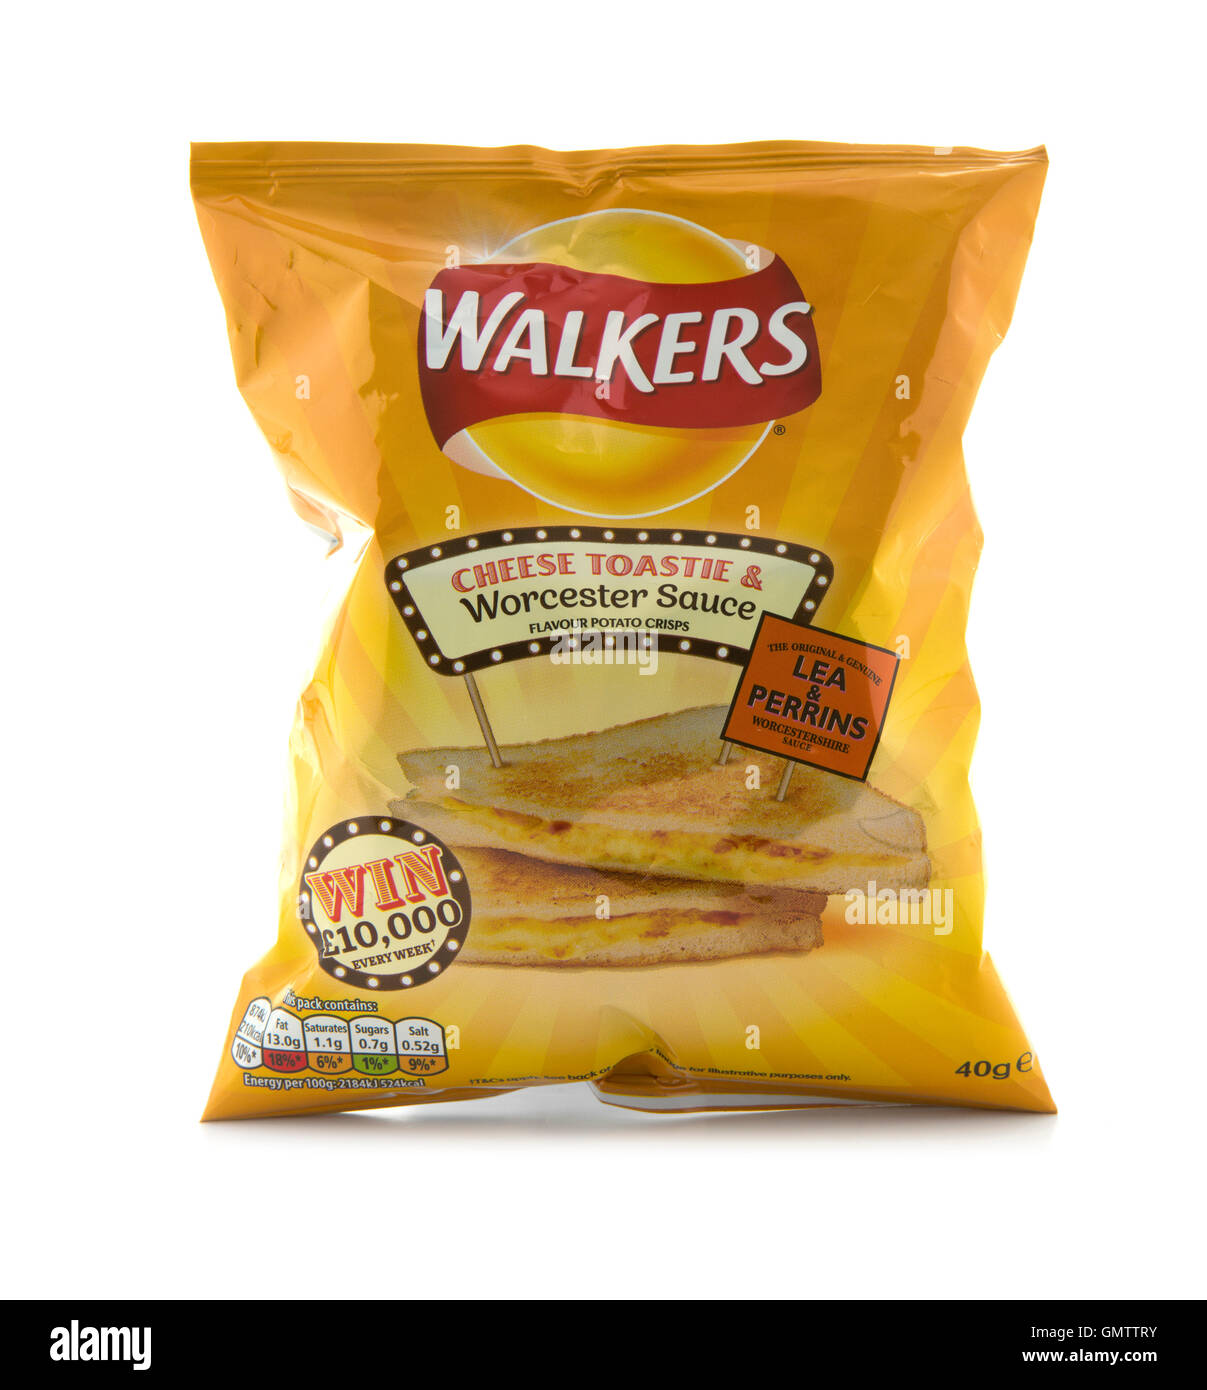 A Bag of Walkers Cheese Toastie and Worcester Sauce Flavour crisps isolated on a white background Stock Photo